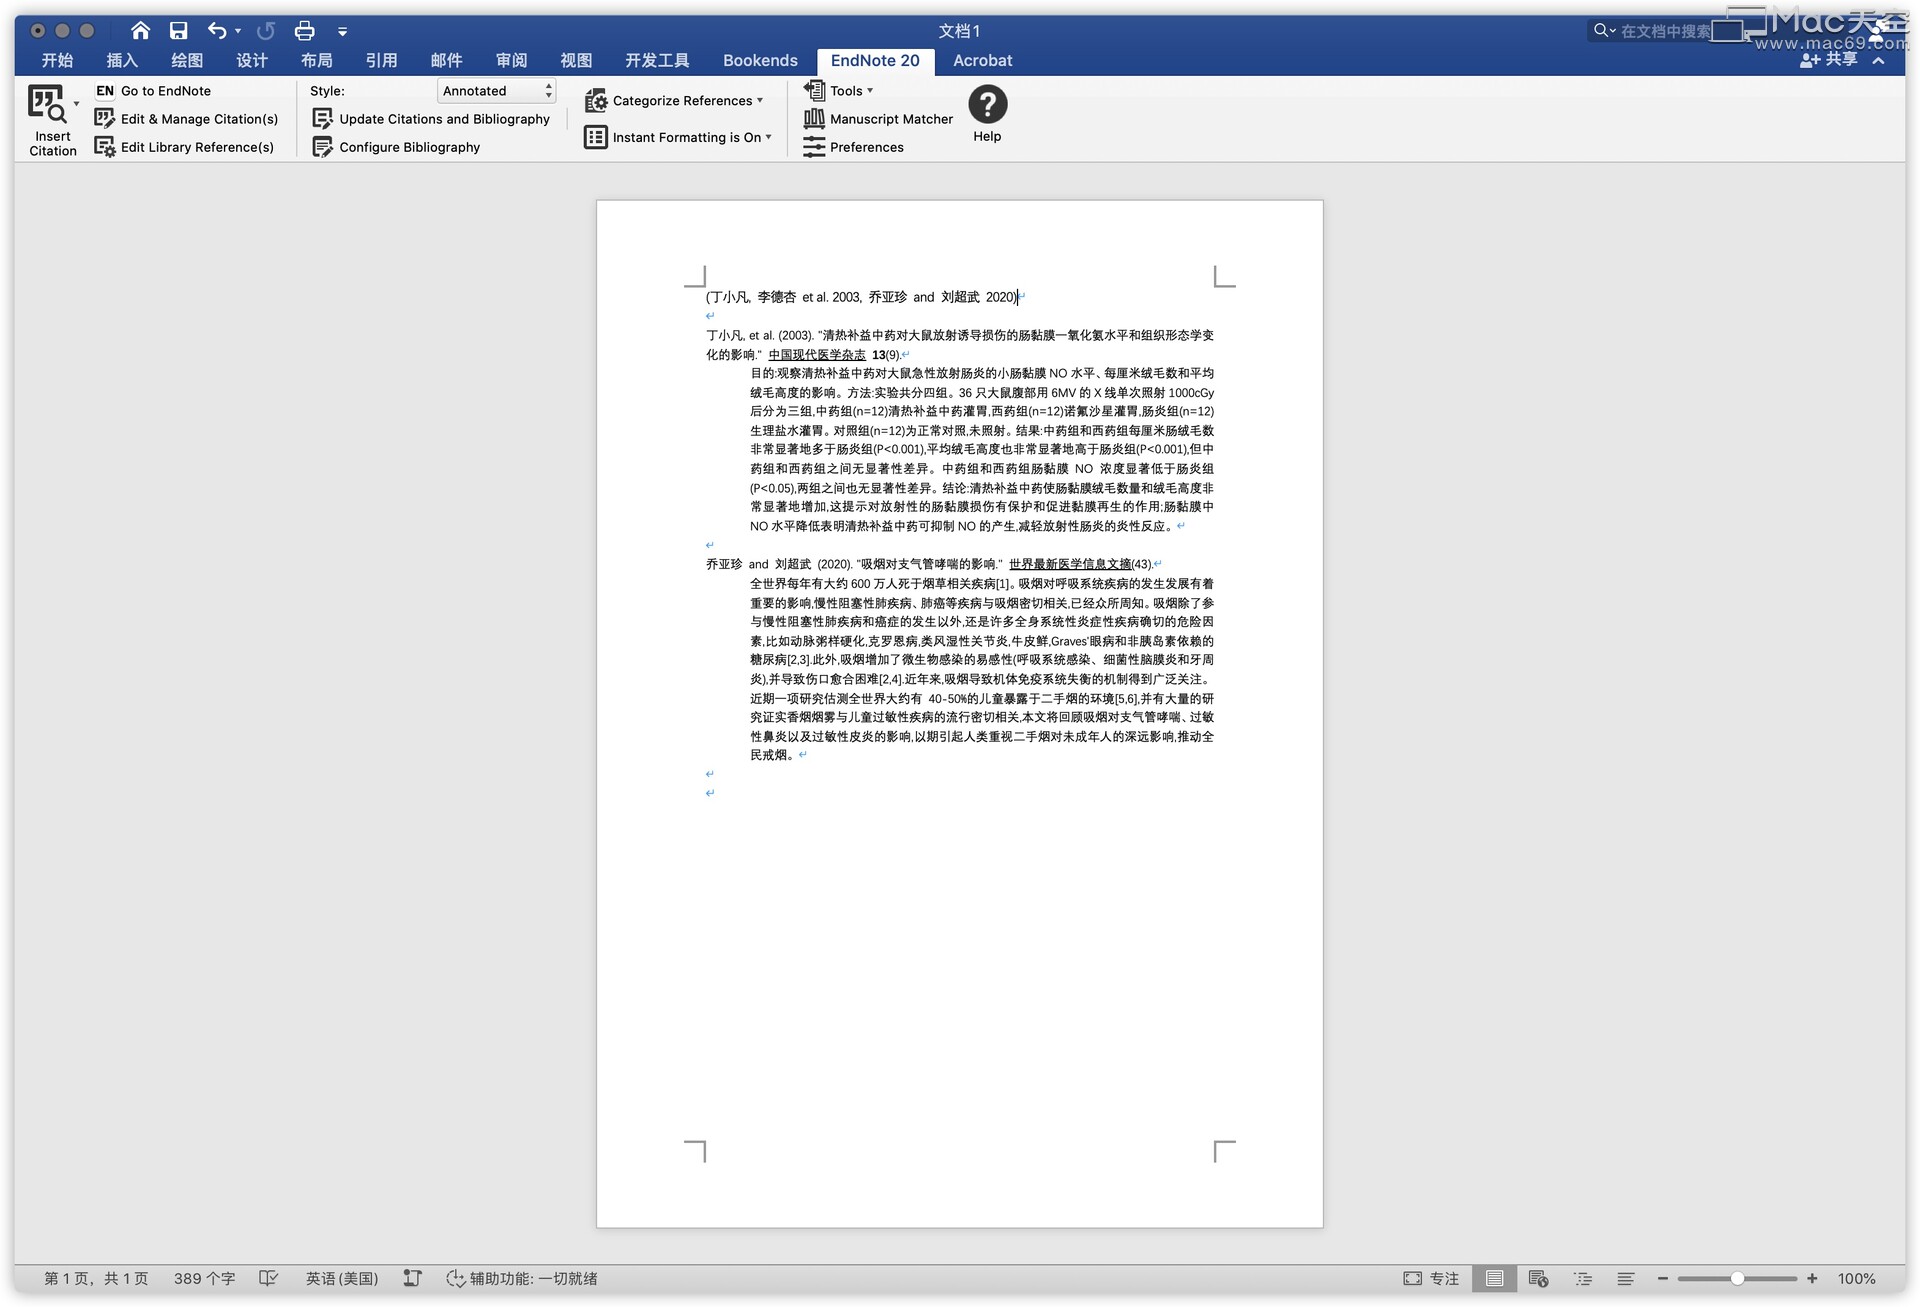 EndNote 21.1.17328 instal the new version for windows